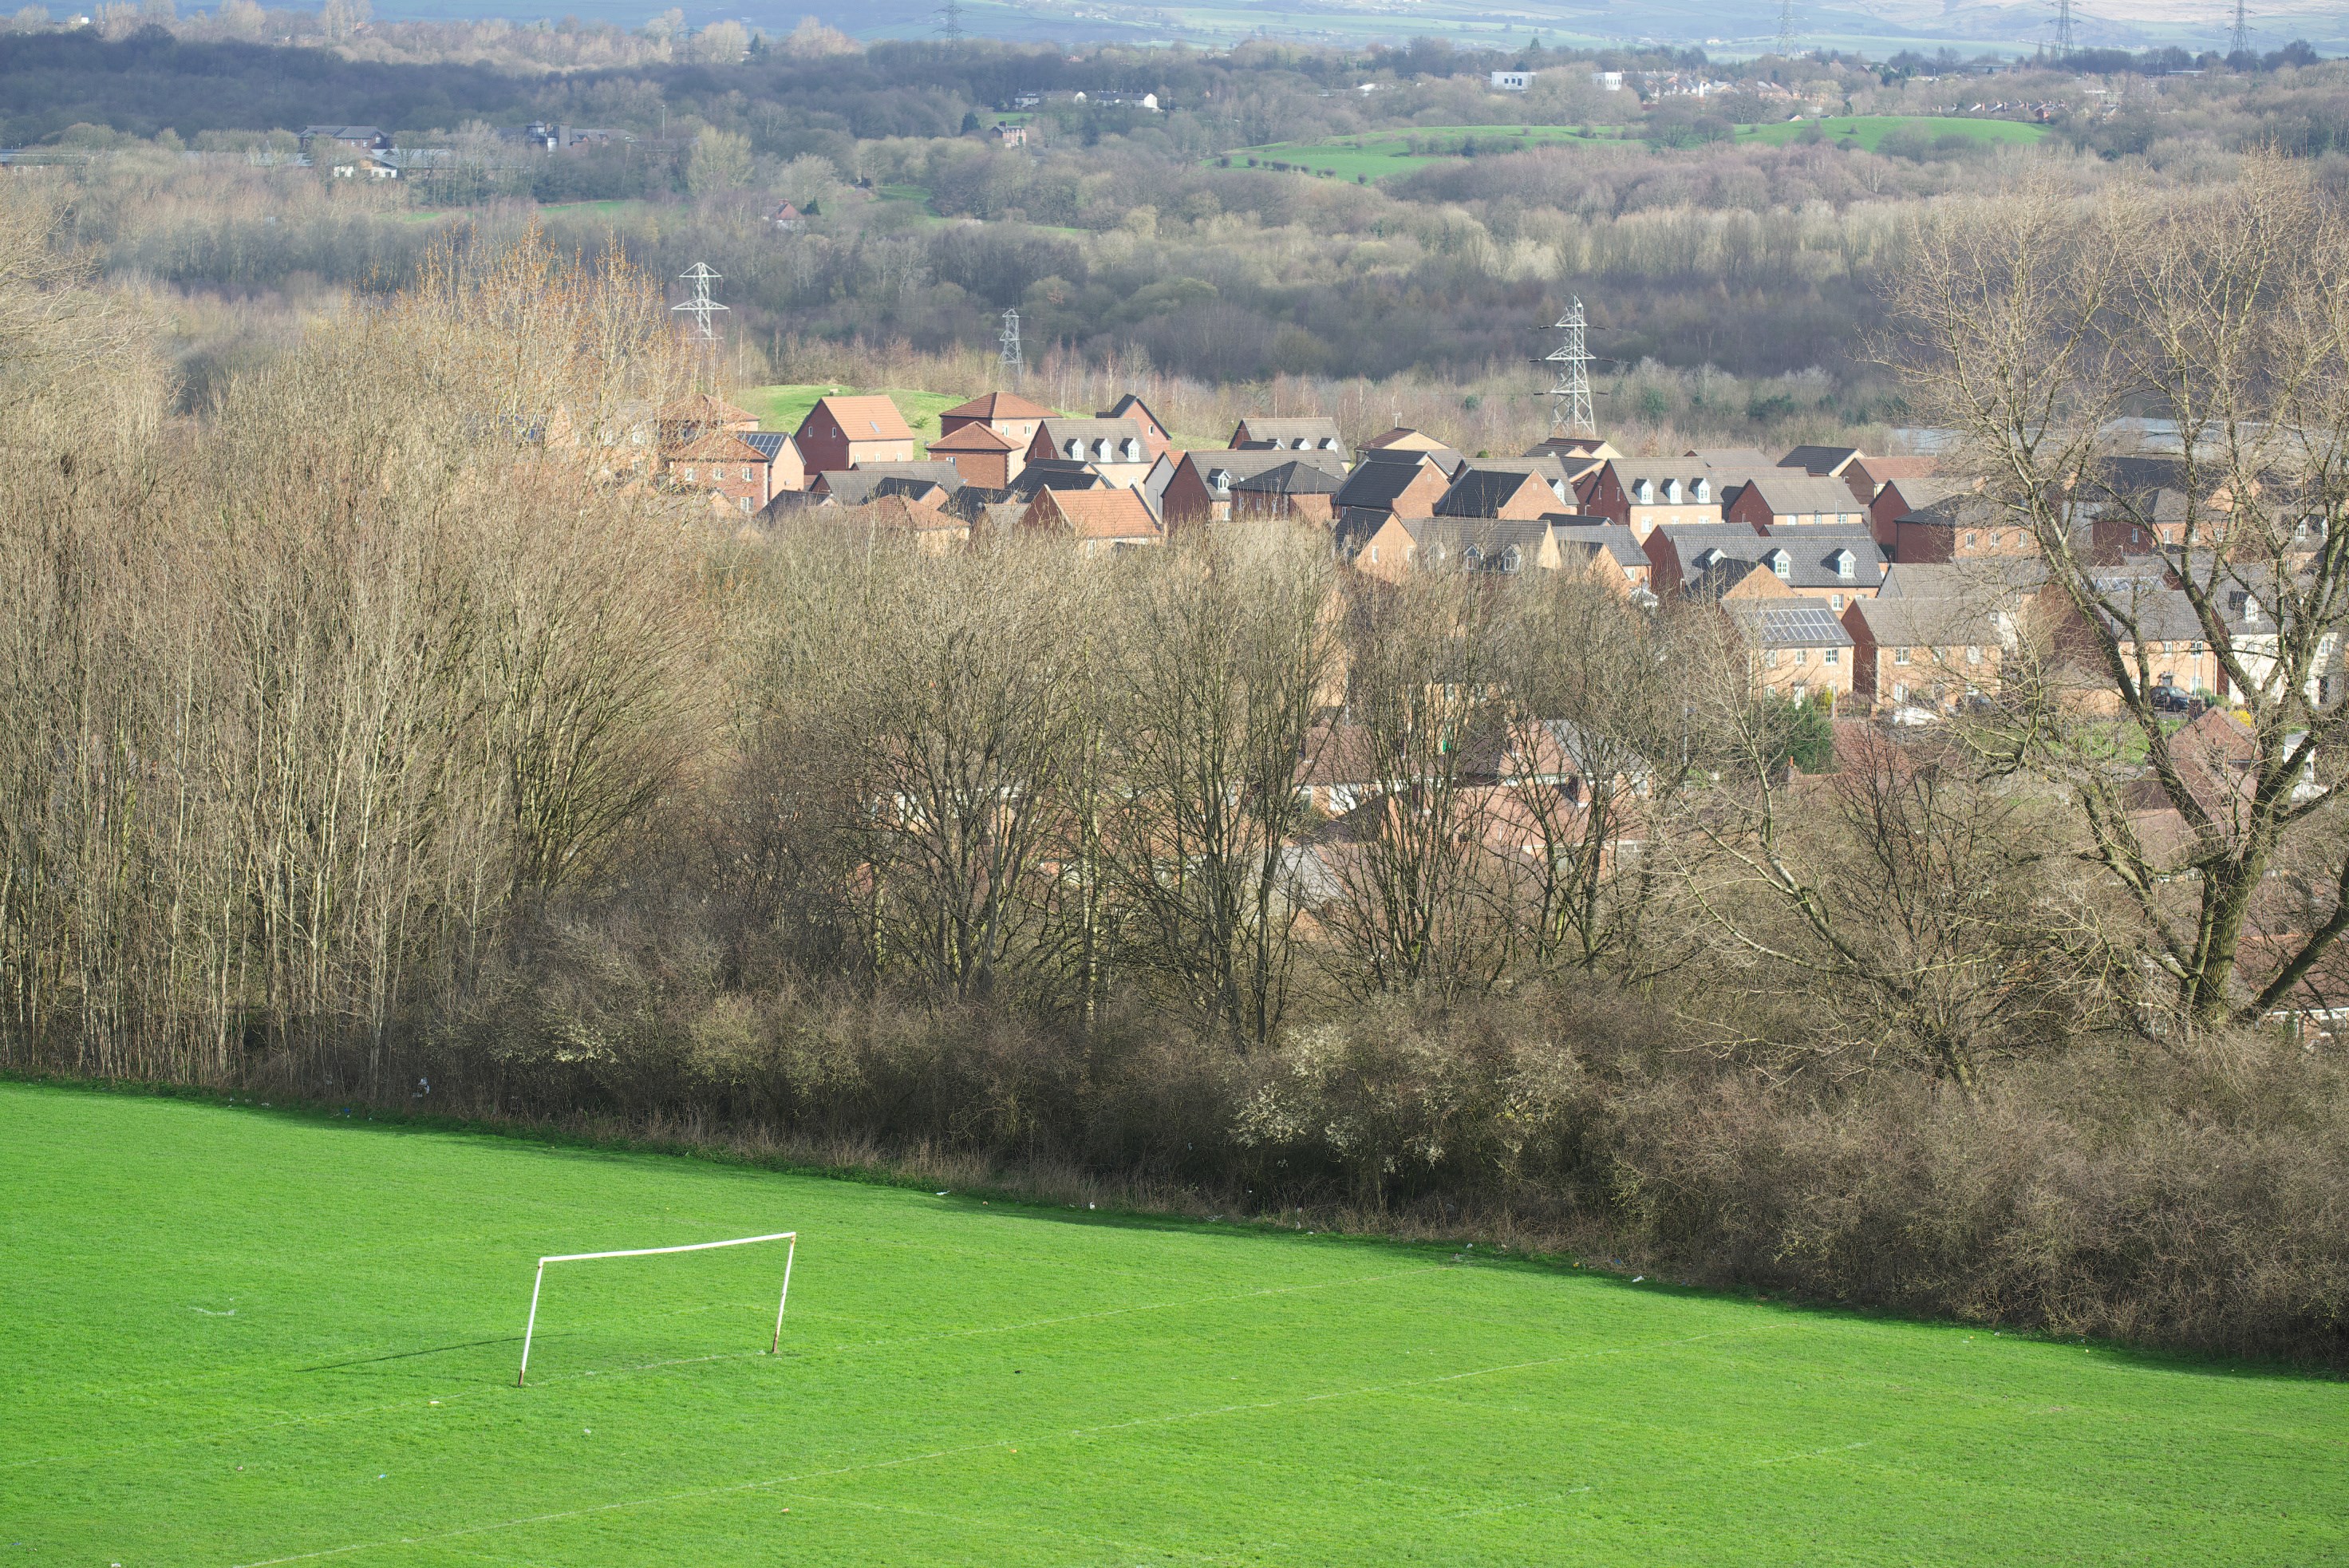 Sports field with goal posts and houses in the distance